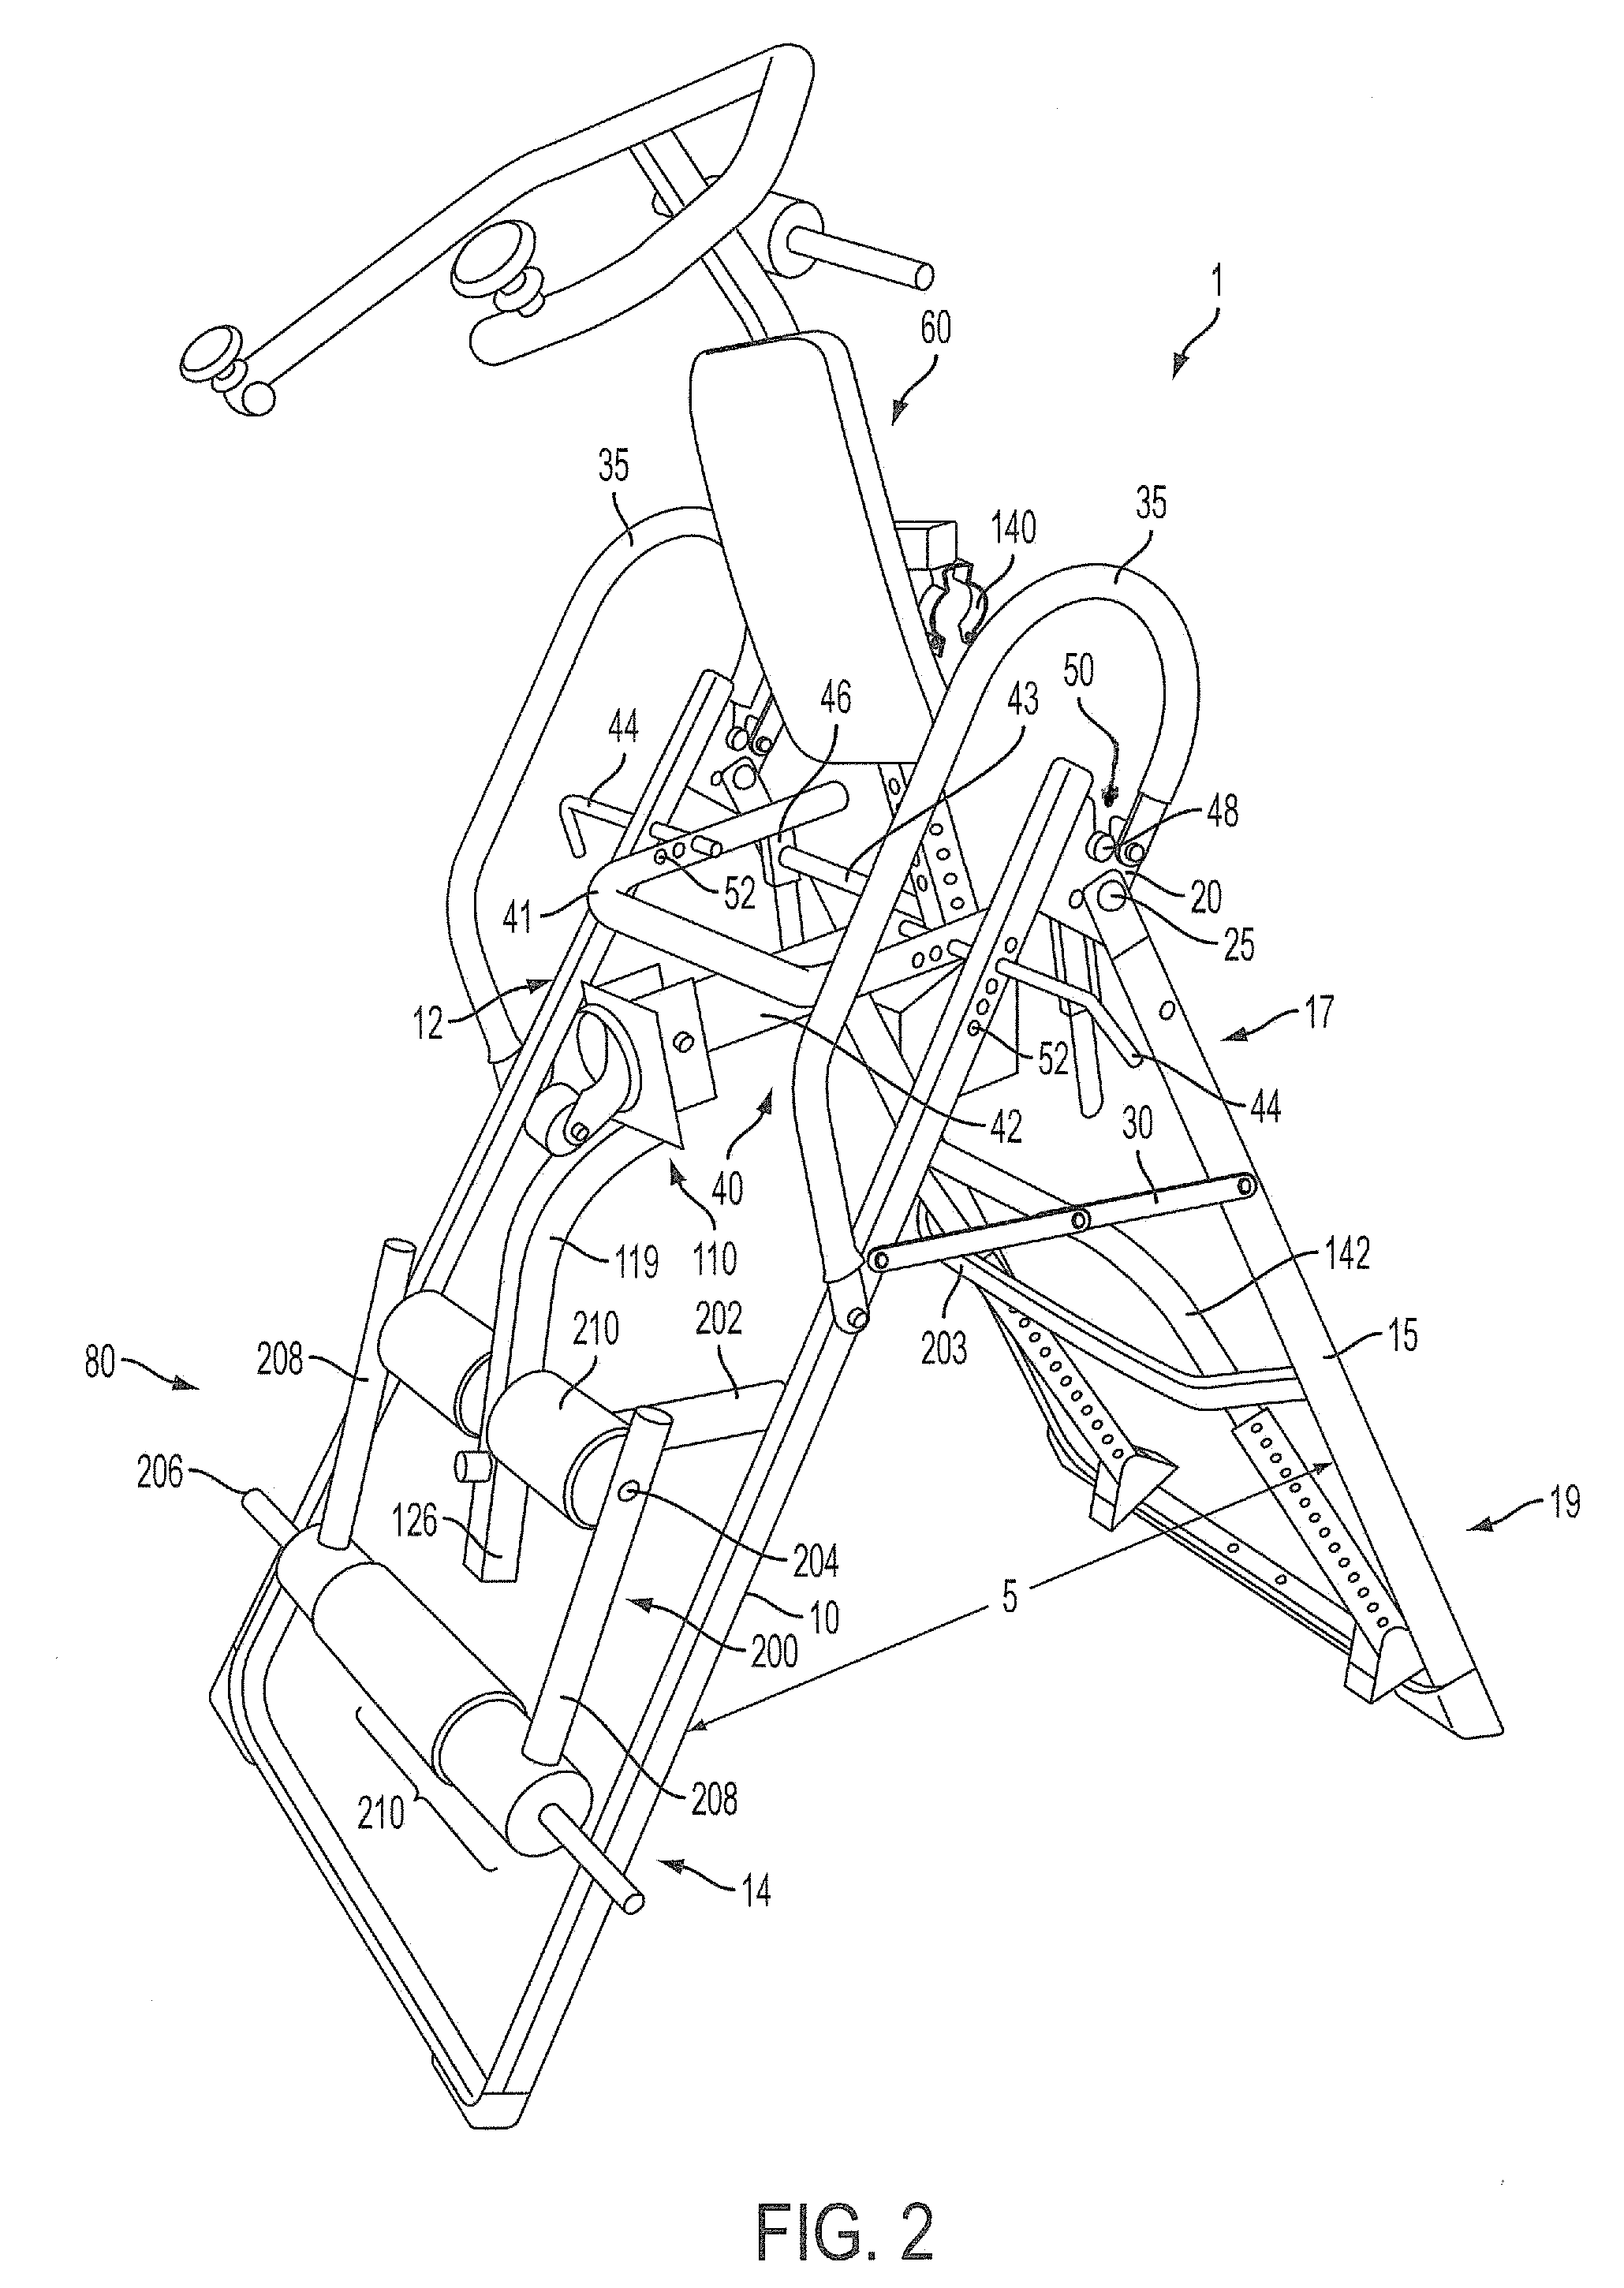 Abdominal exercise and training apparatus